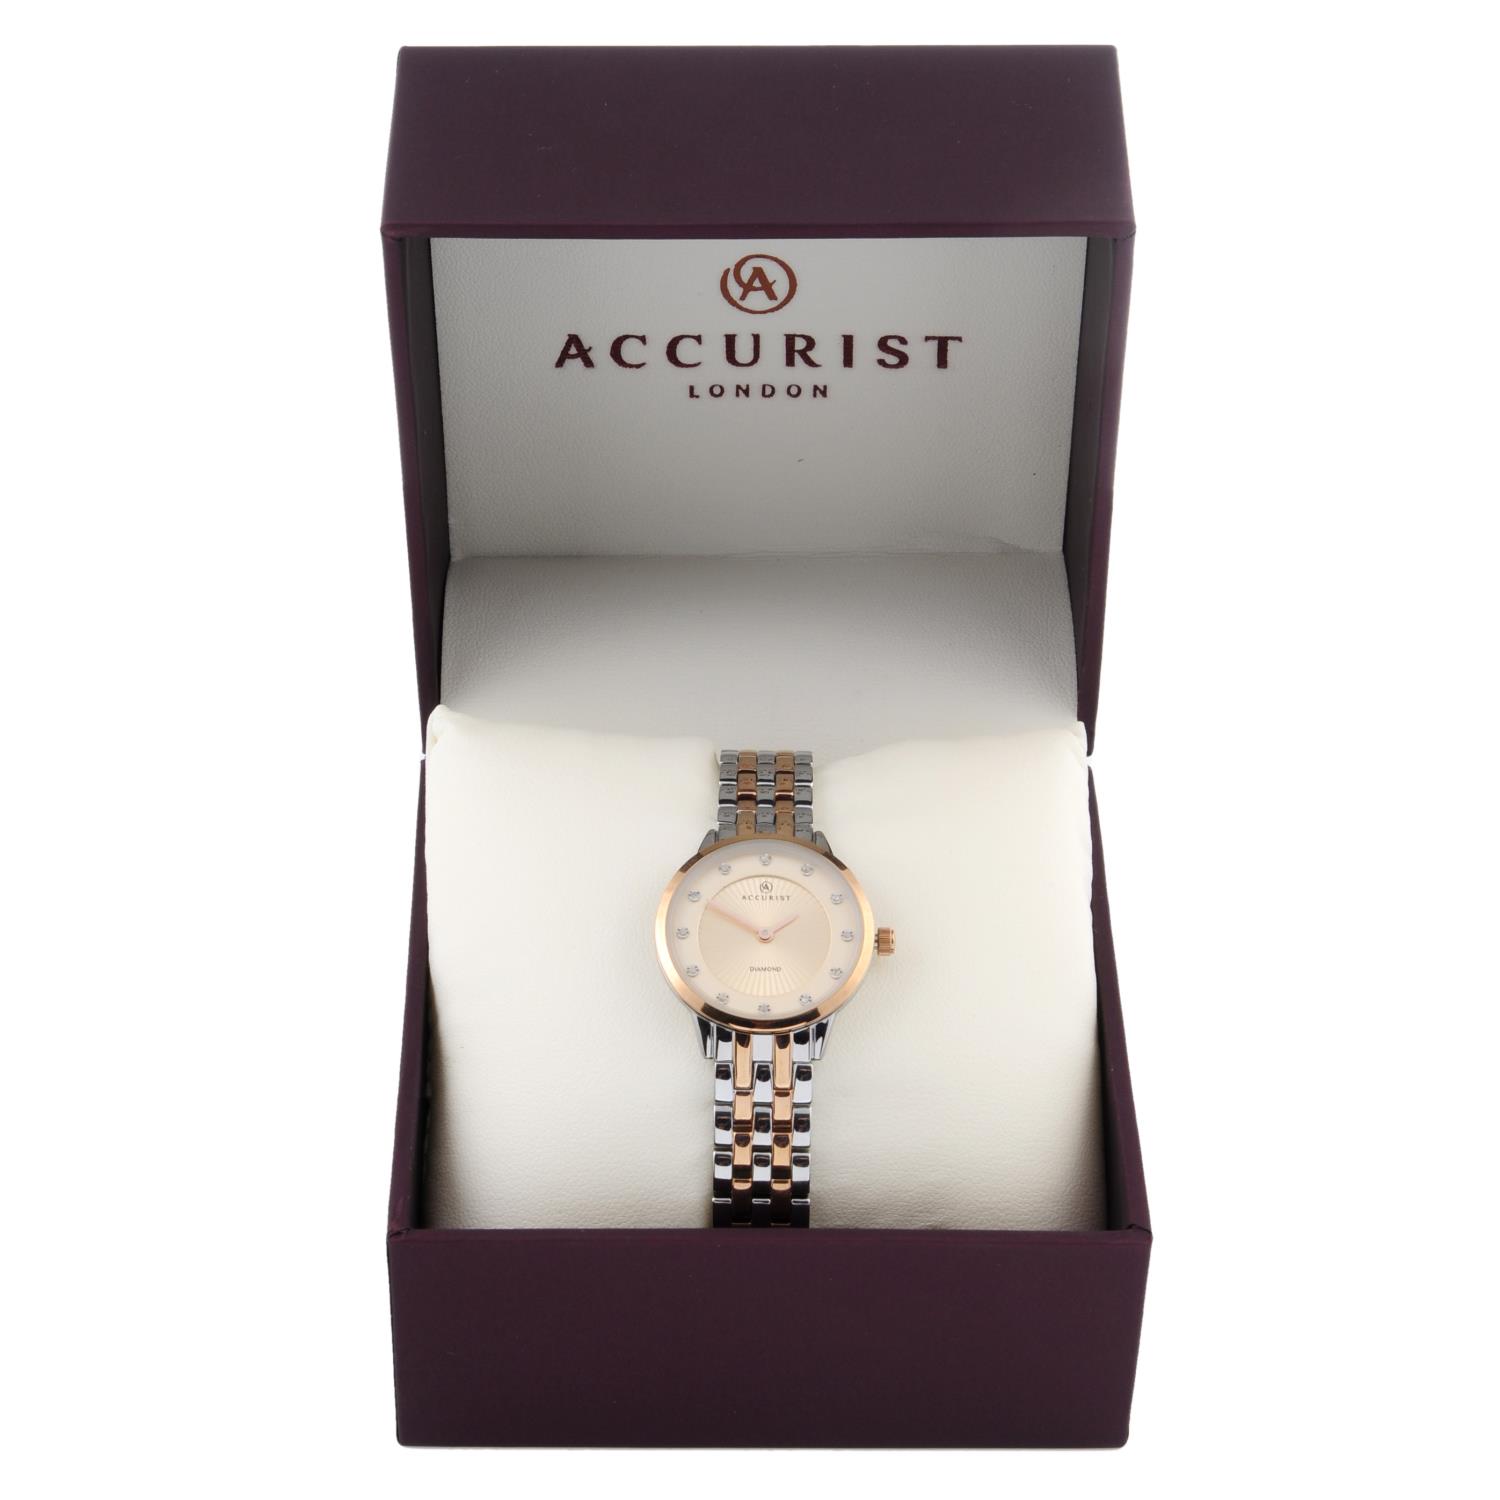 A group of boxed watches, to include examples by Accurist and Pulsar.